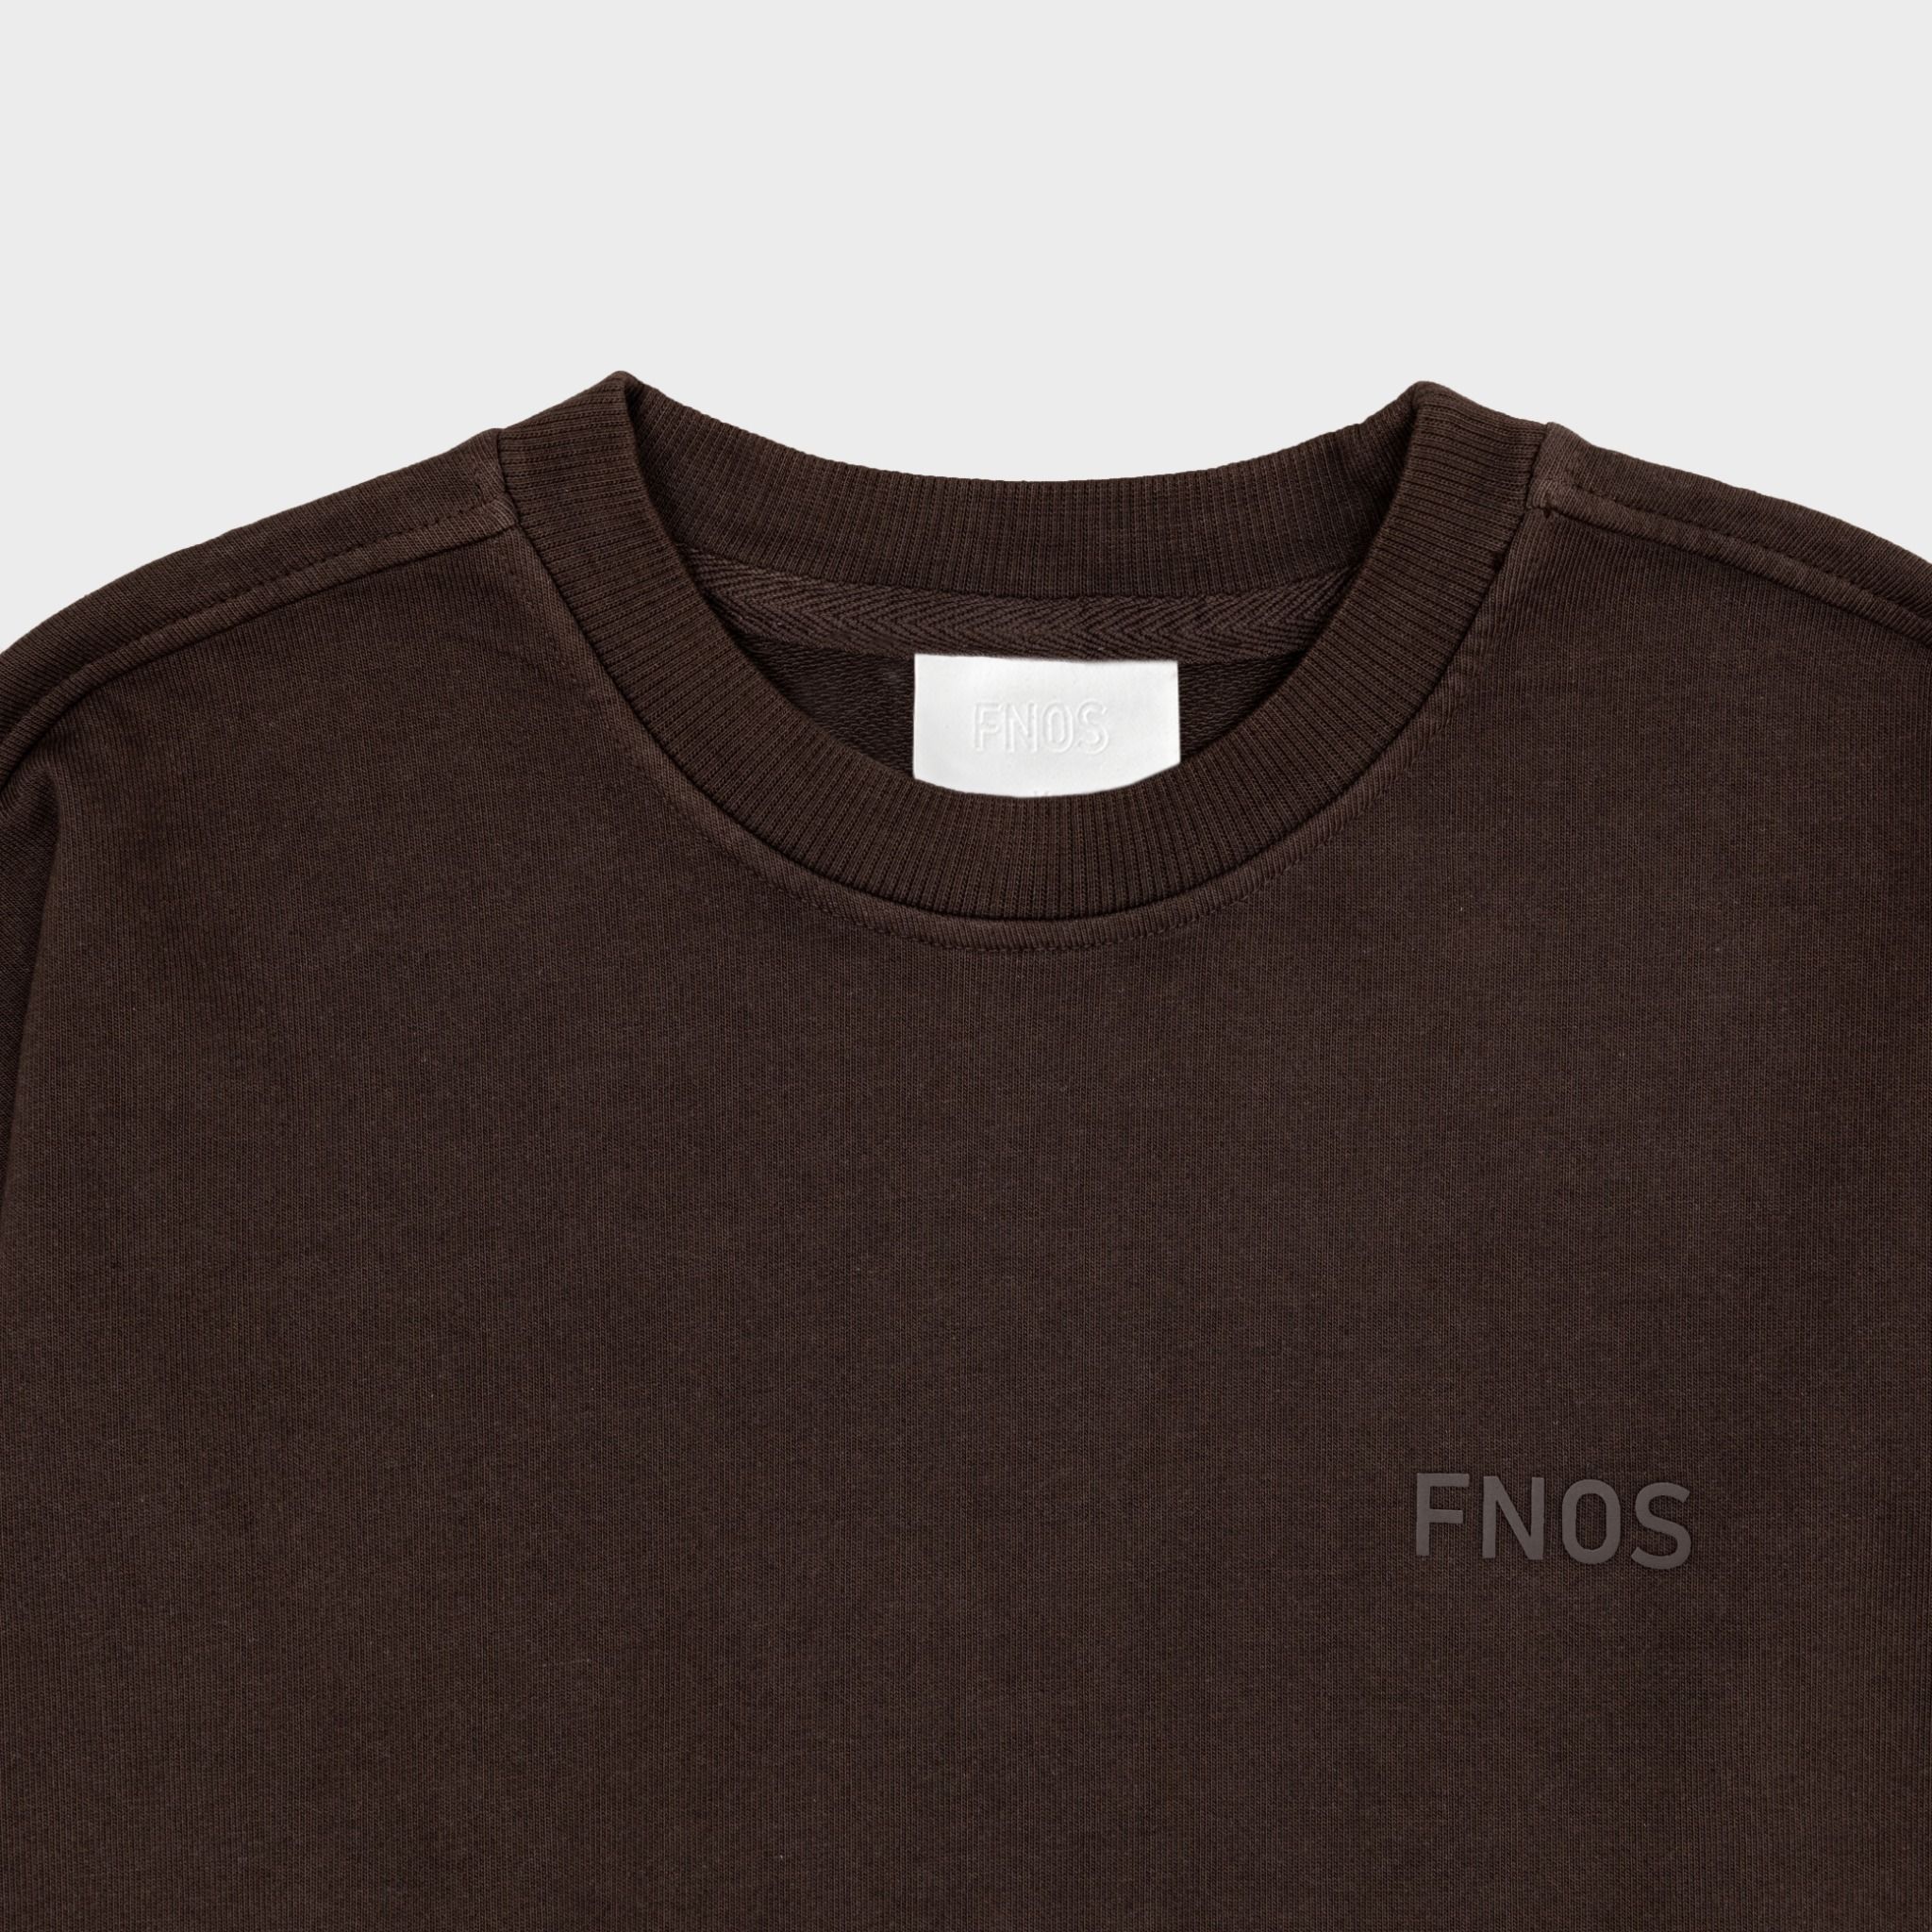  SW6 - FNOS WASHED SWEATER - CHOCOLATE 